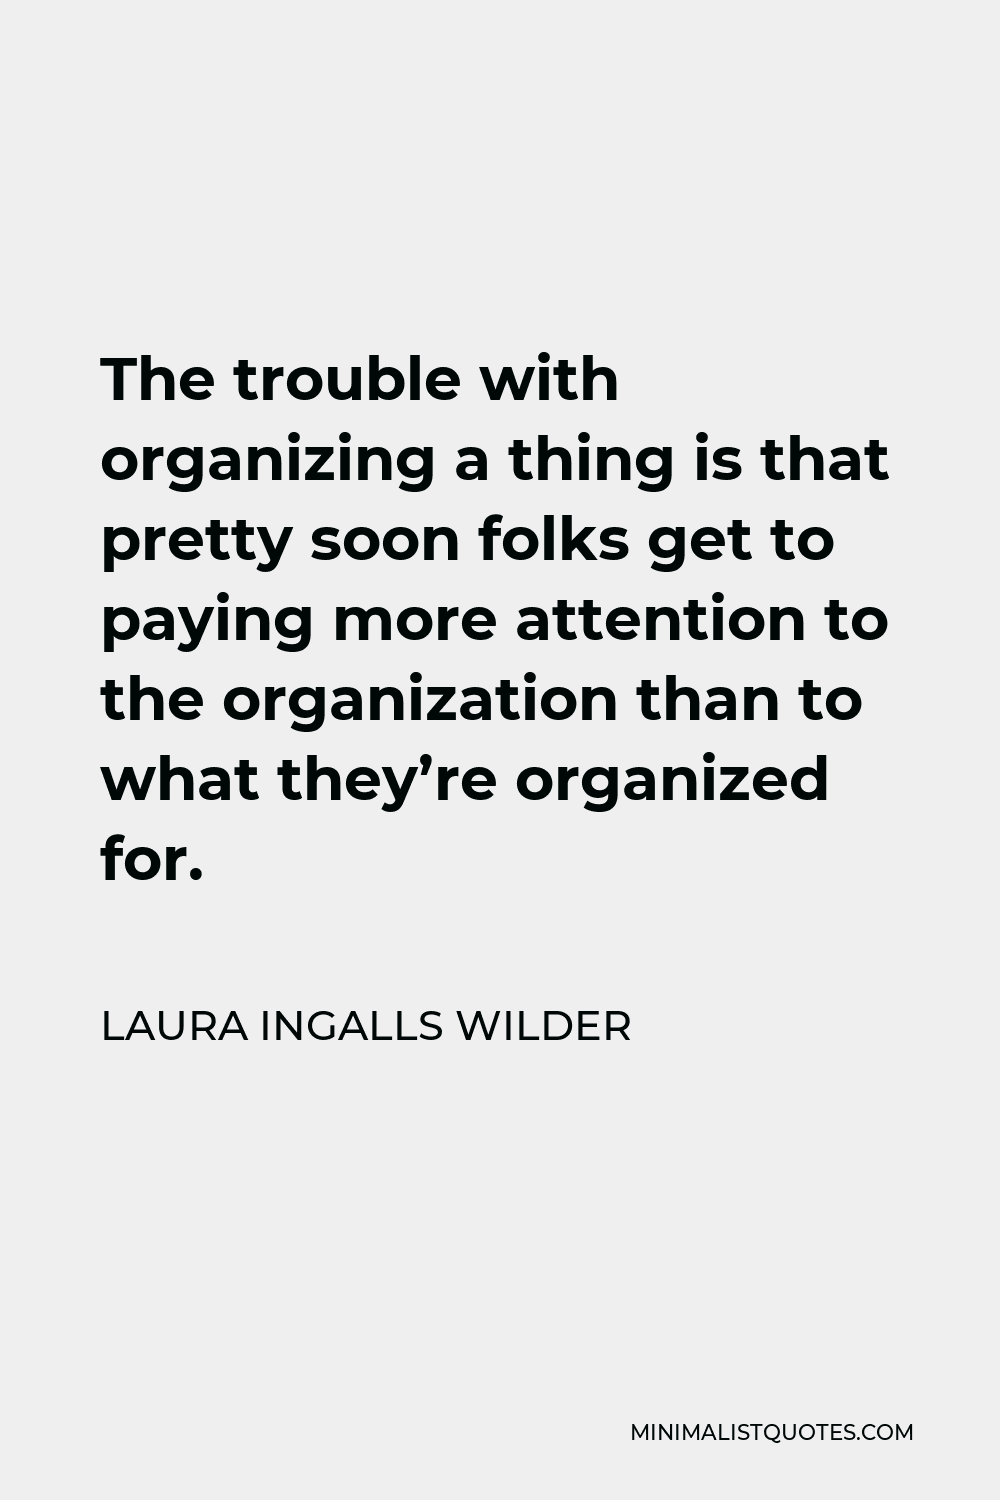 Laura Ingalls Wilder Quote - The trouble with organizing a thing is that pretty soon folks get to paying more attention to the organization than to what they’re organized for.